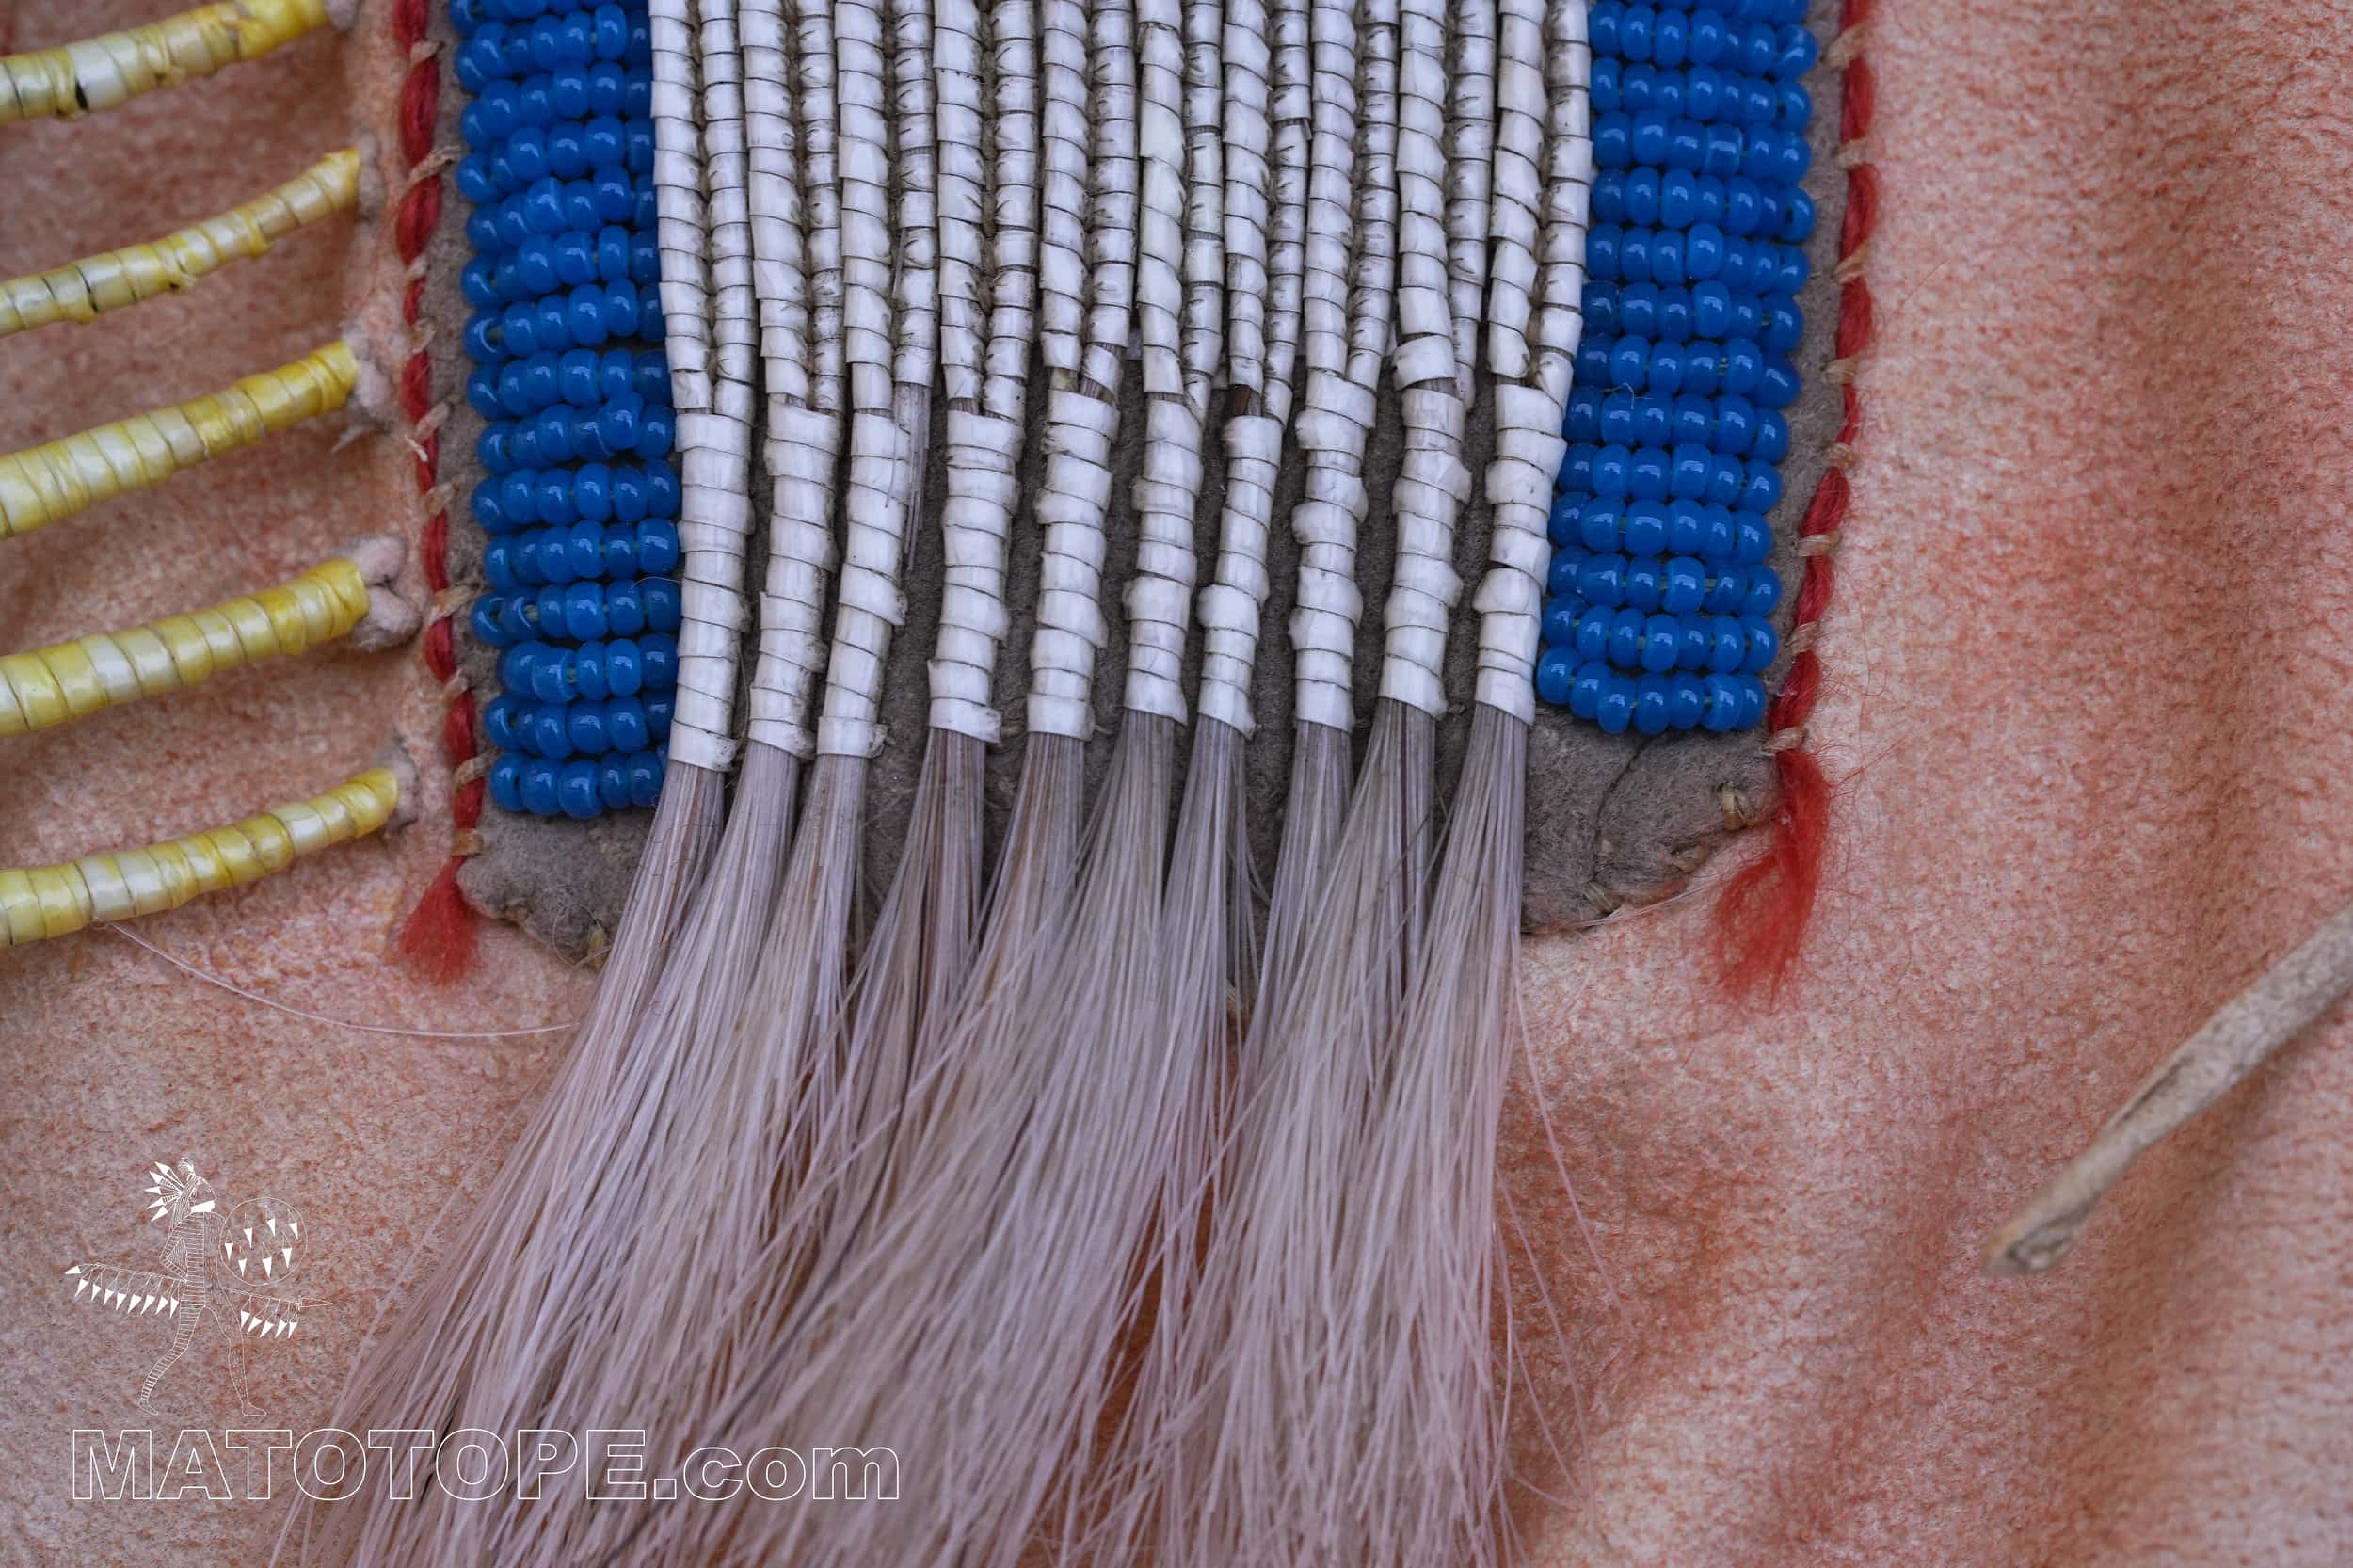 Reclaiming Tradition: How Hair Beads Connect Us to Our History - Okayplayer